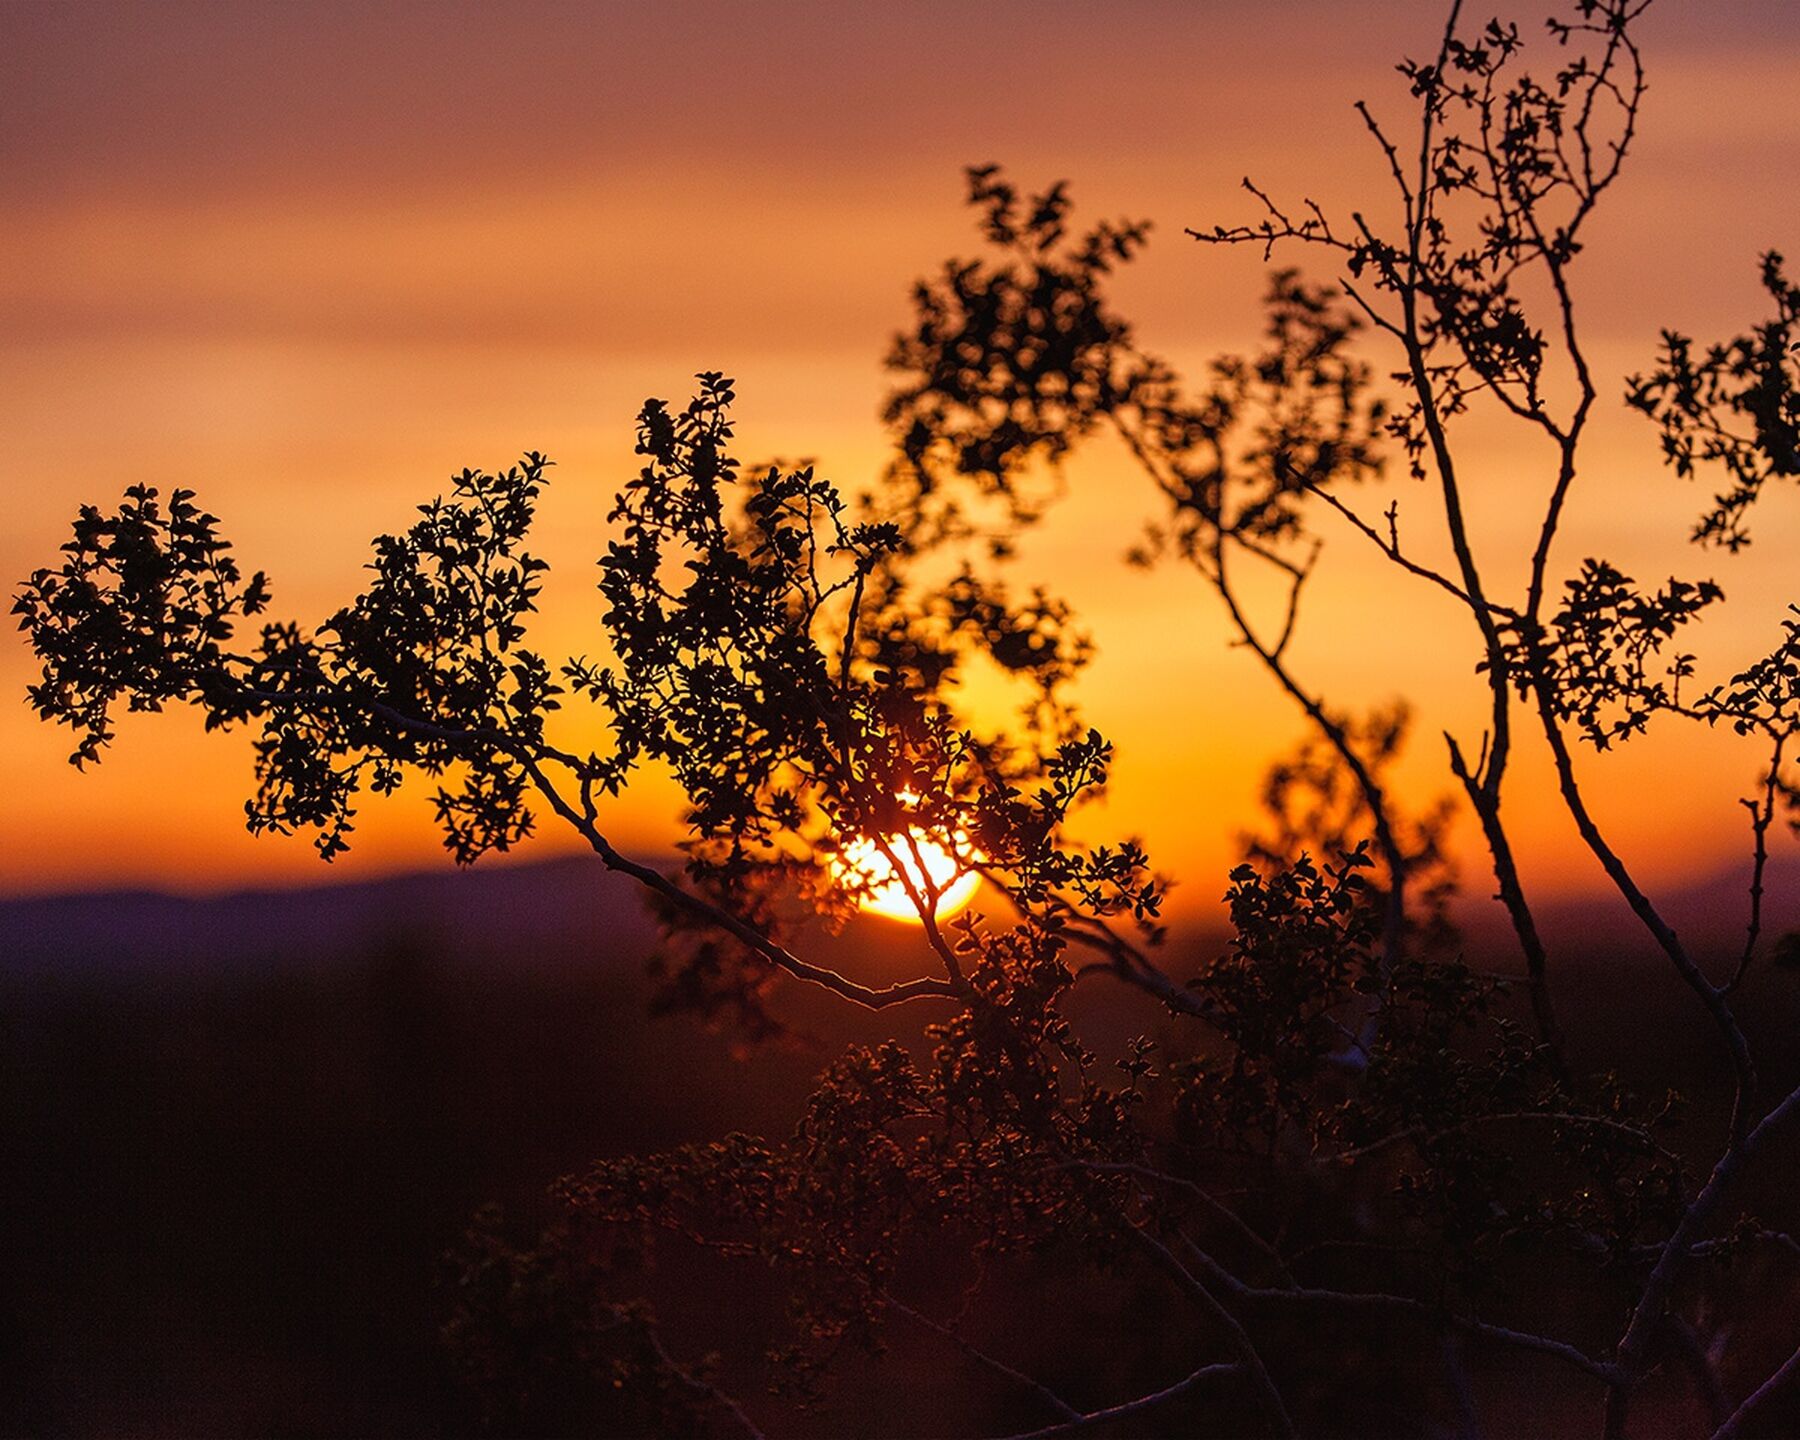 A bush silhouetted by the rising sun in Joshua Tree, California